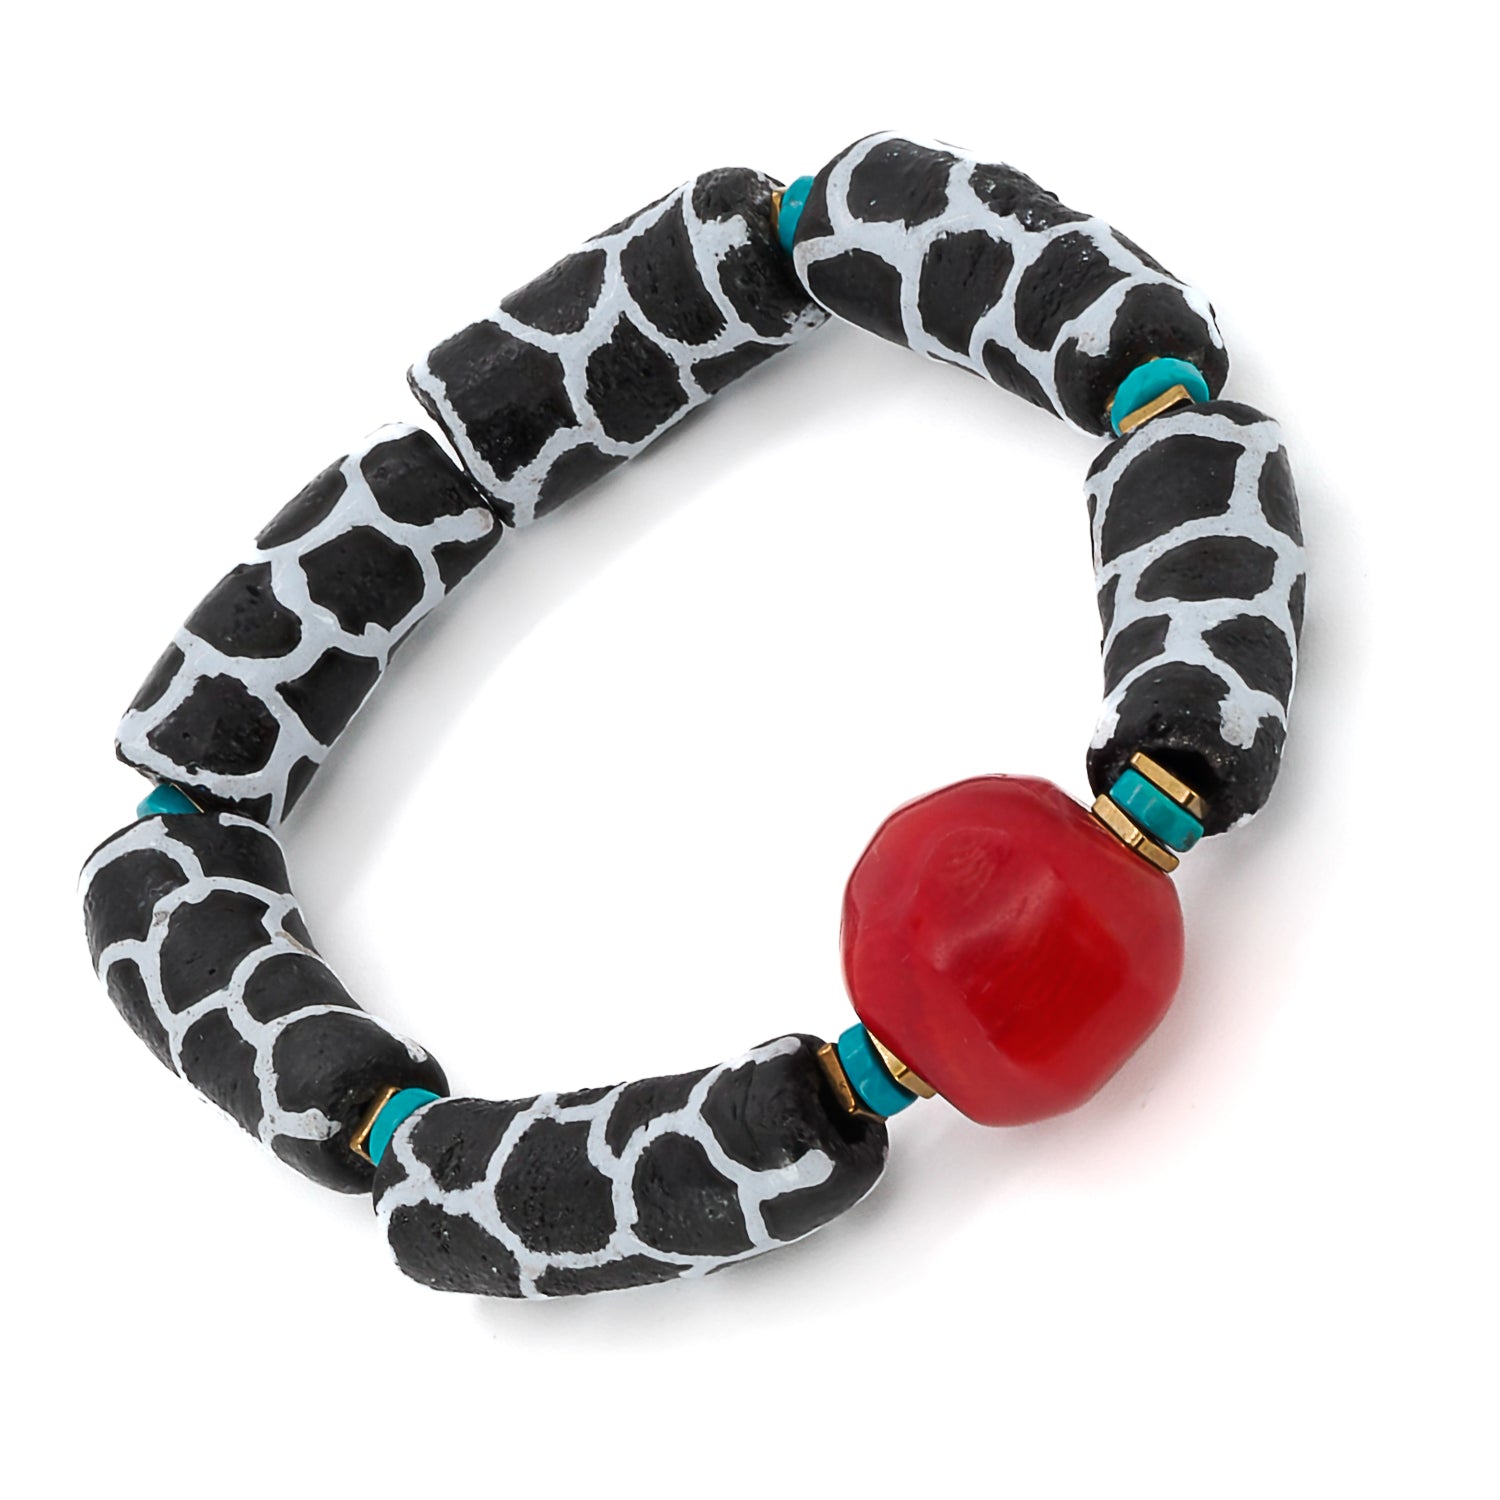 Detailed shot of the gold hematite spacers and turquoise stones placed between the zebra tube beads on the African Zebra Red Bracelet.